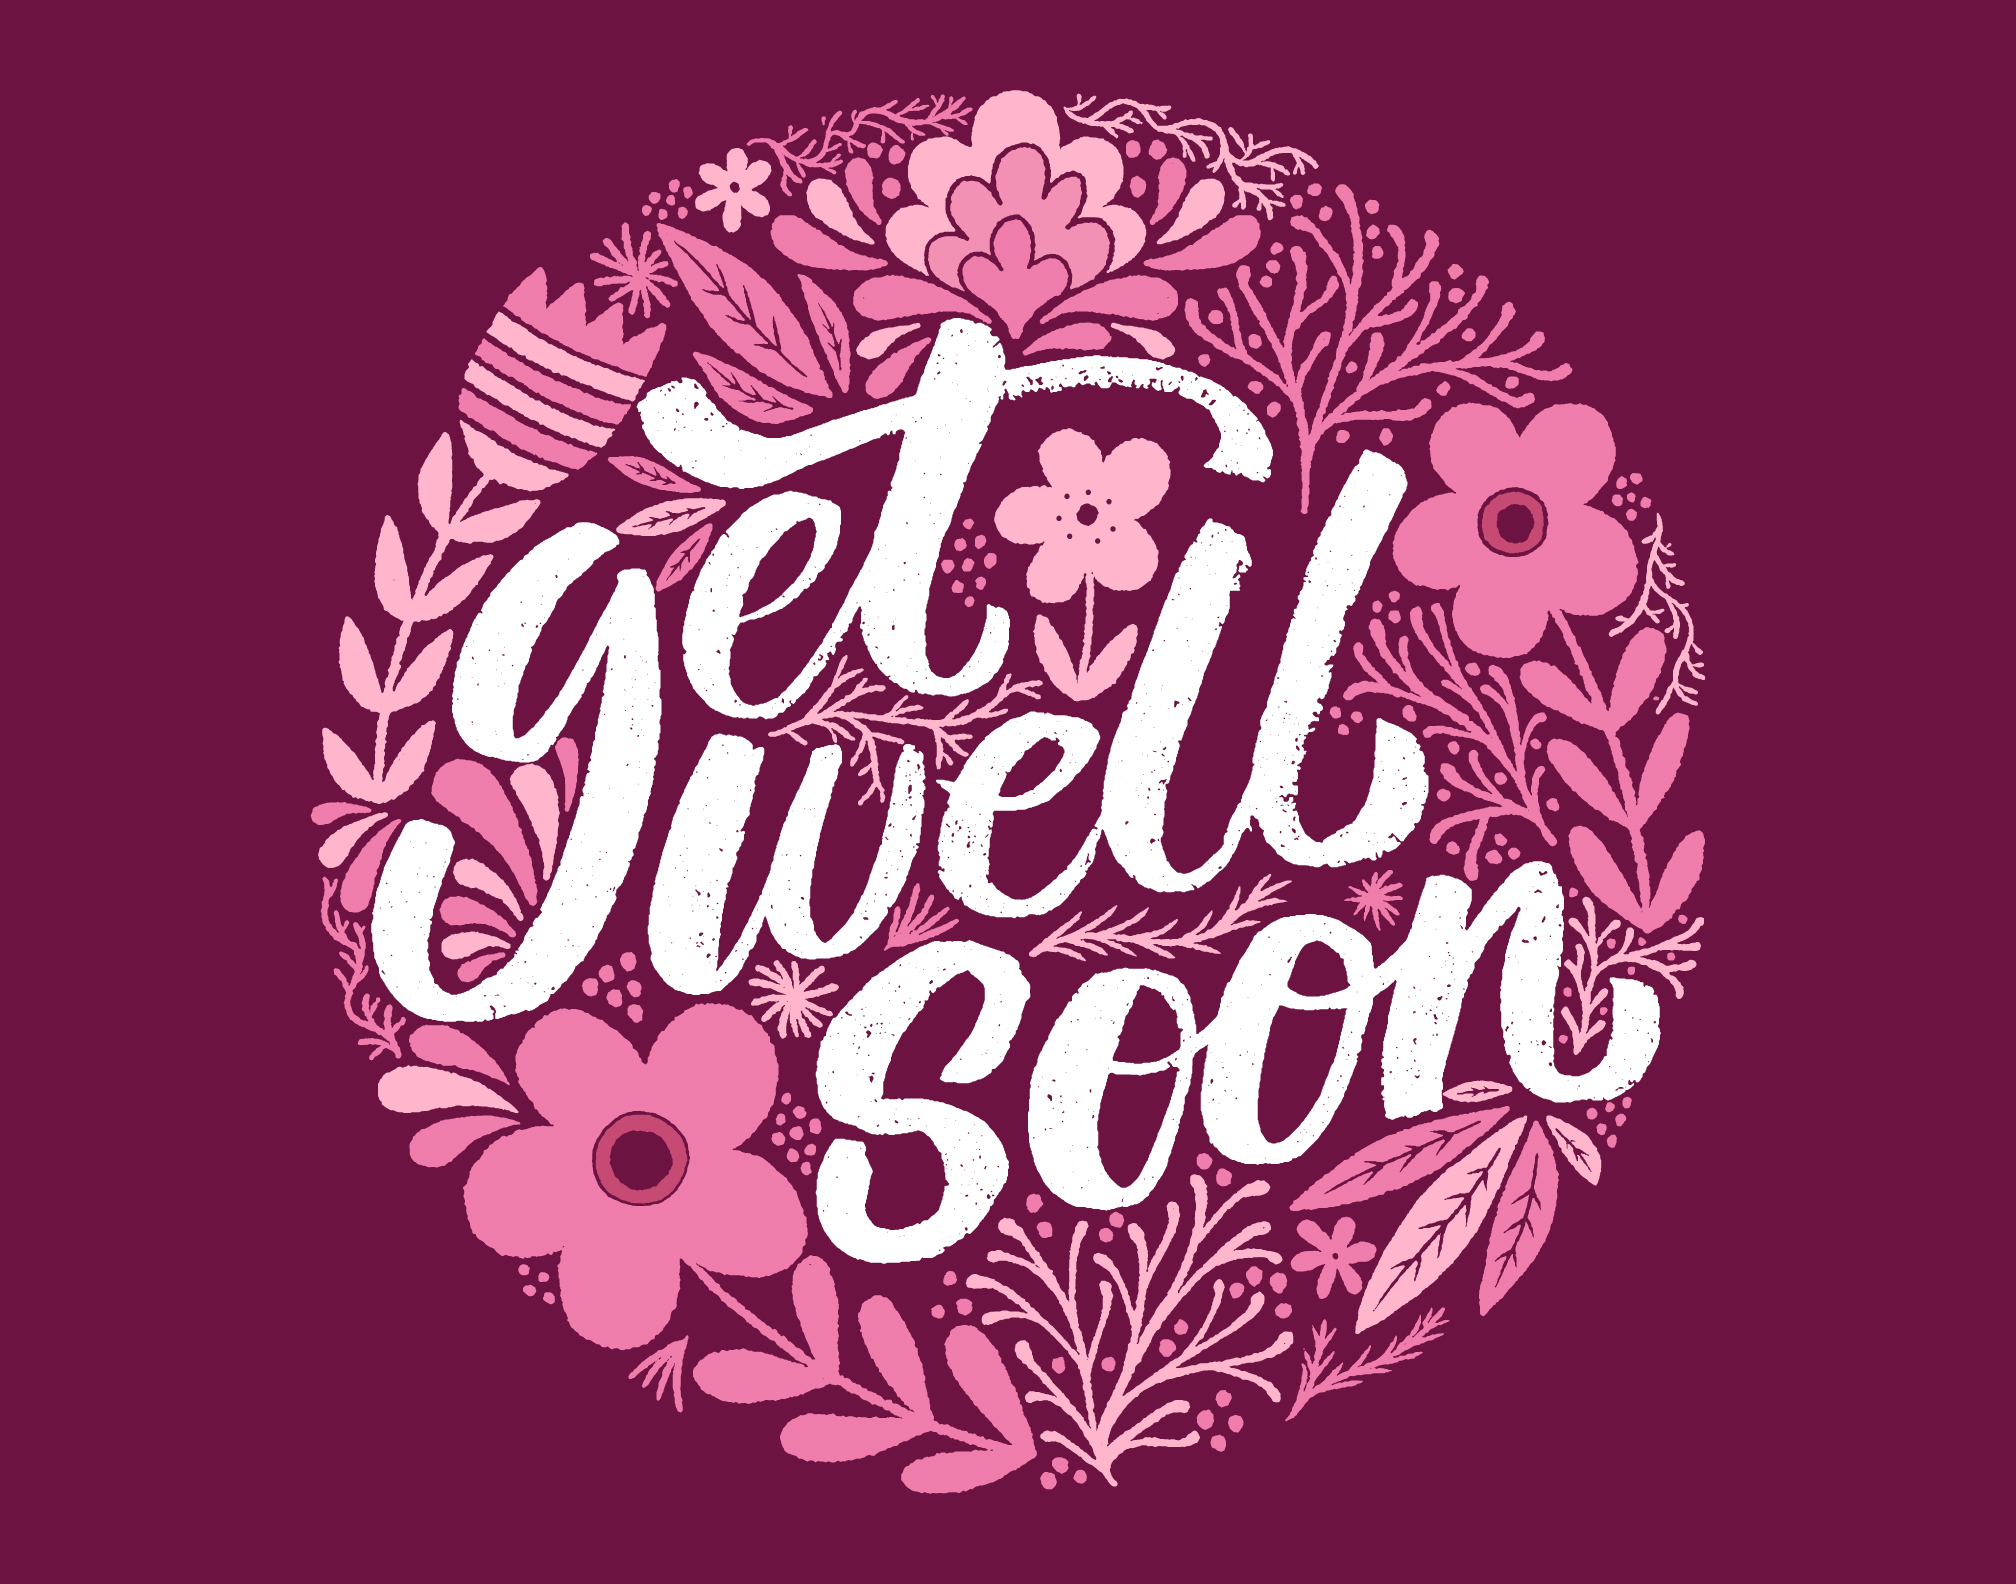 Download Get well soon card - Download Free Vectors, Clipart ...